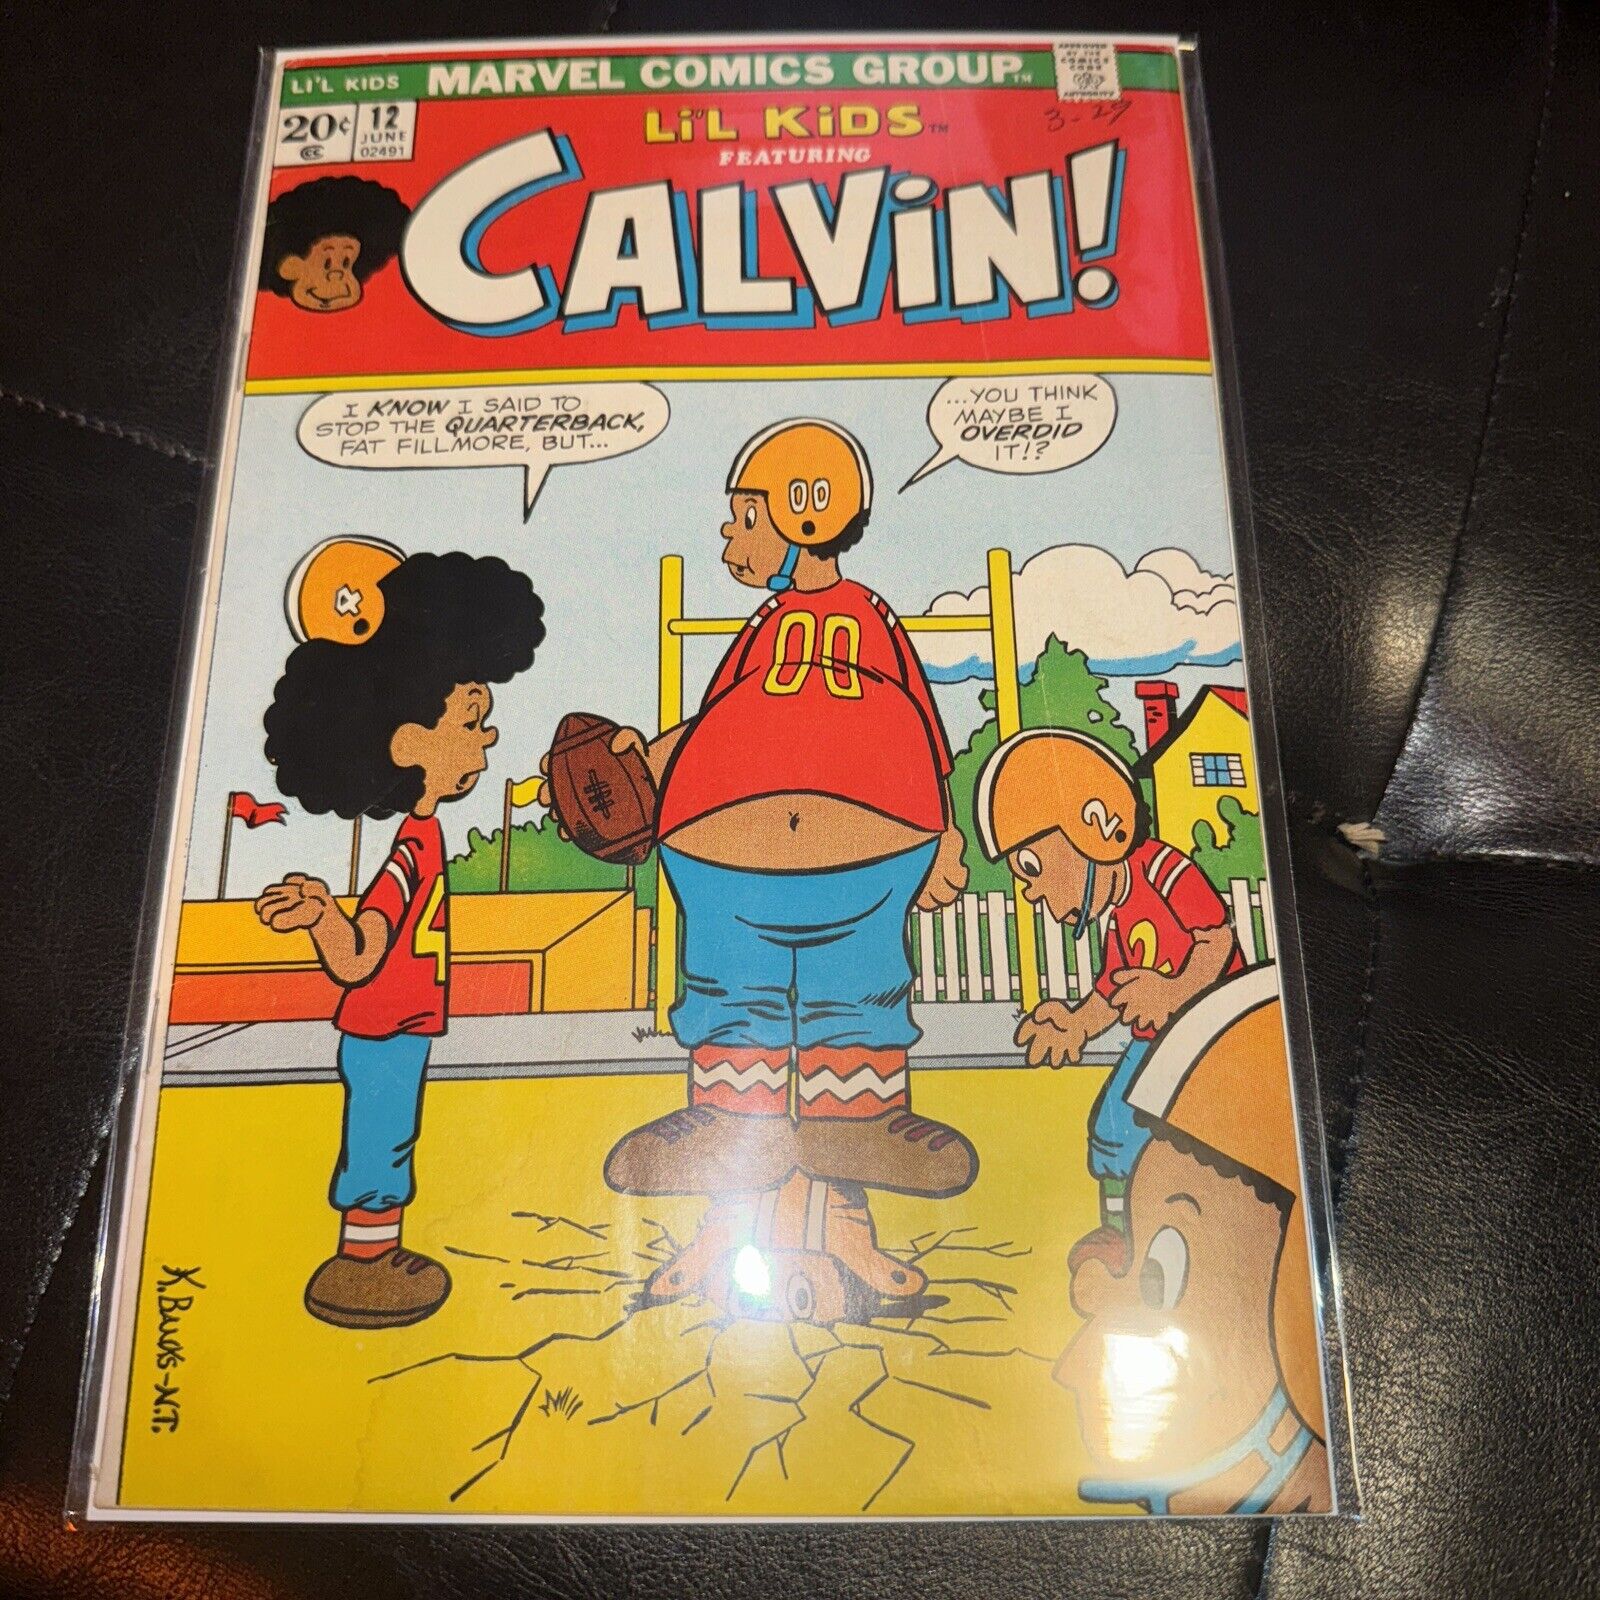 LI'L KIDS #12 (G/VG) 1973 FEATURING CALVIN by KEVIN BANKS BRONZE AGE MARVEL